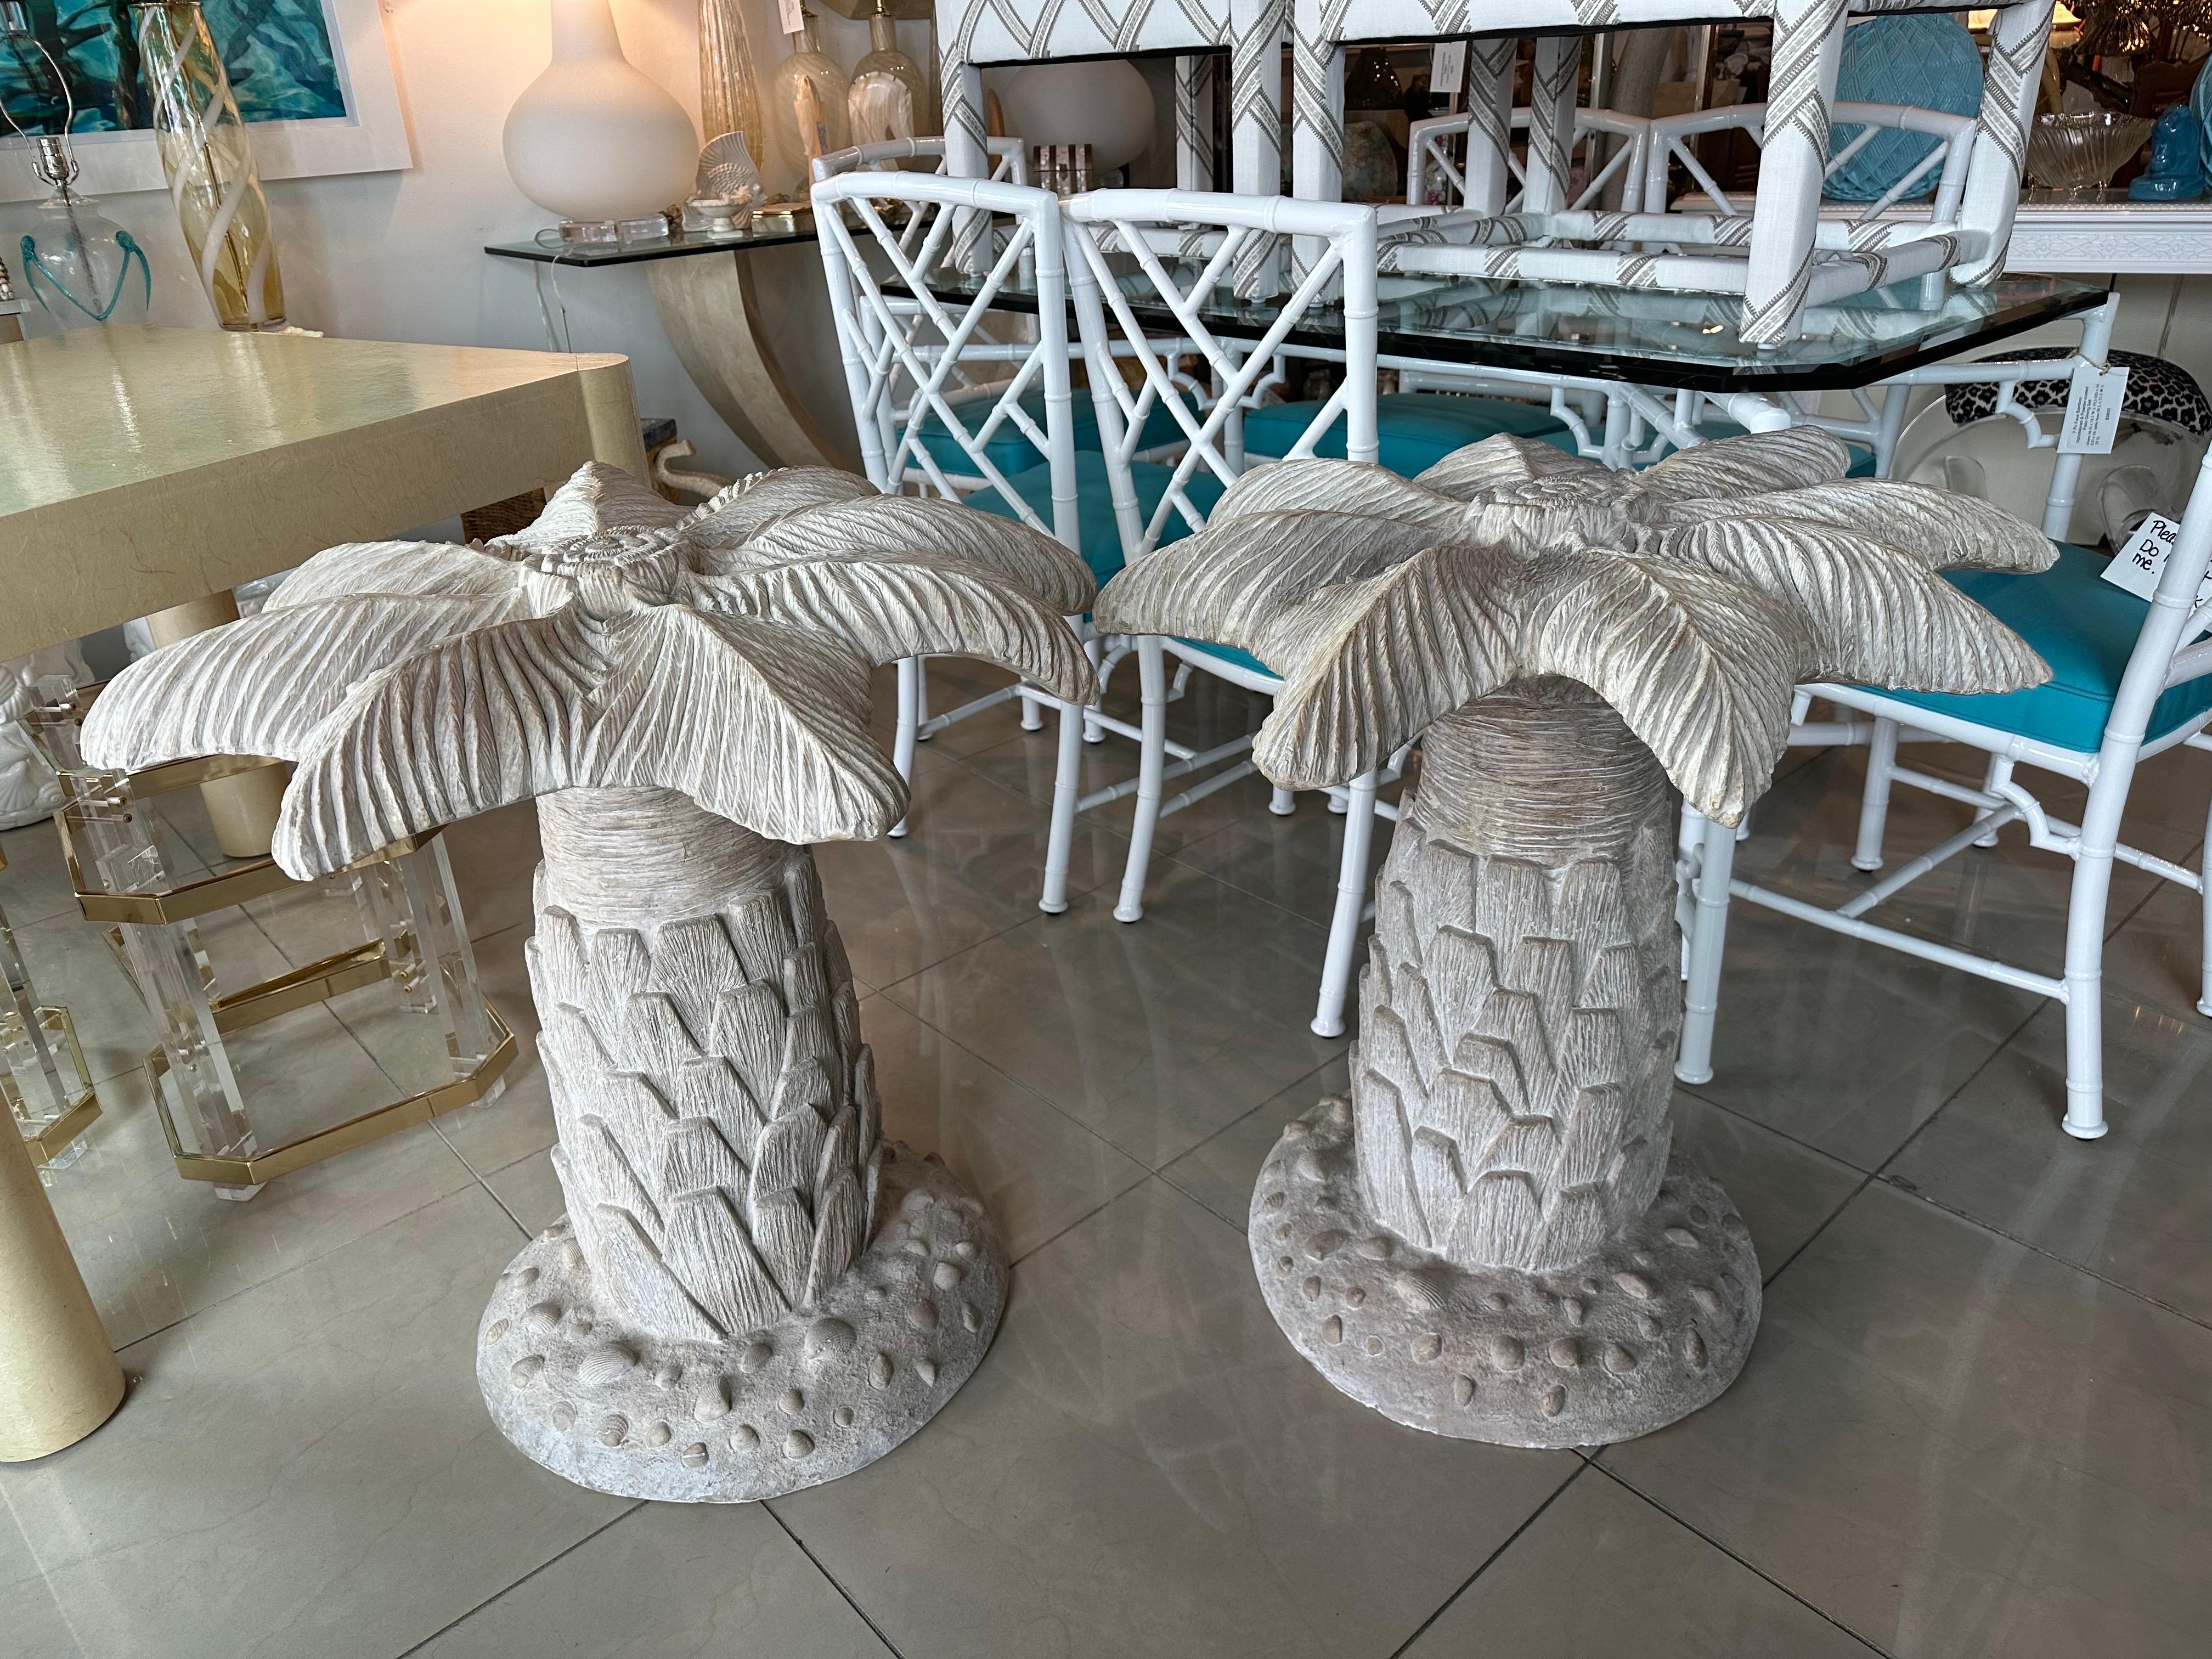 Amazing vintage plaster palm tree table base. These are being sold individually with option to buy one or two. This can be used as a single base with a round top for a dining table, game table or center, entry table. As a pair it can be used as a